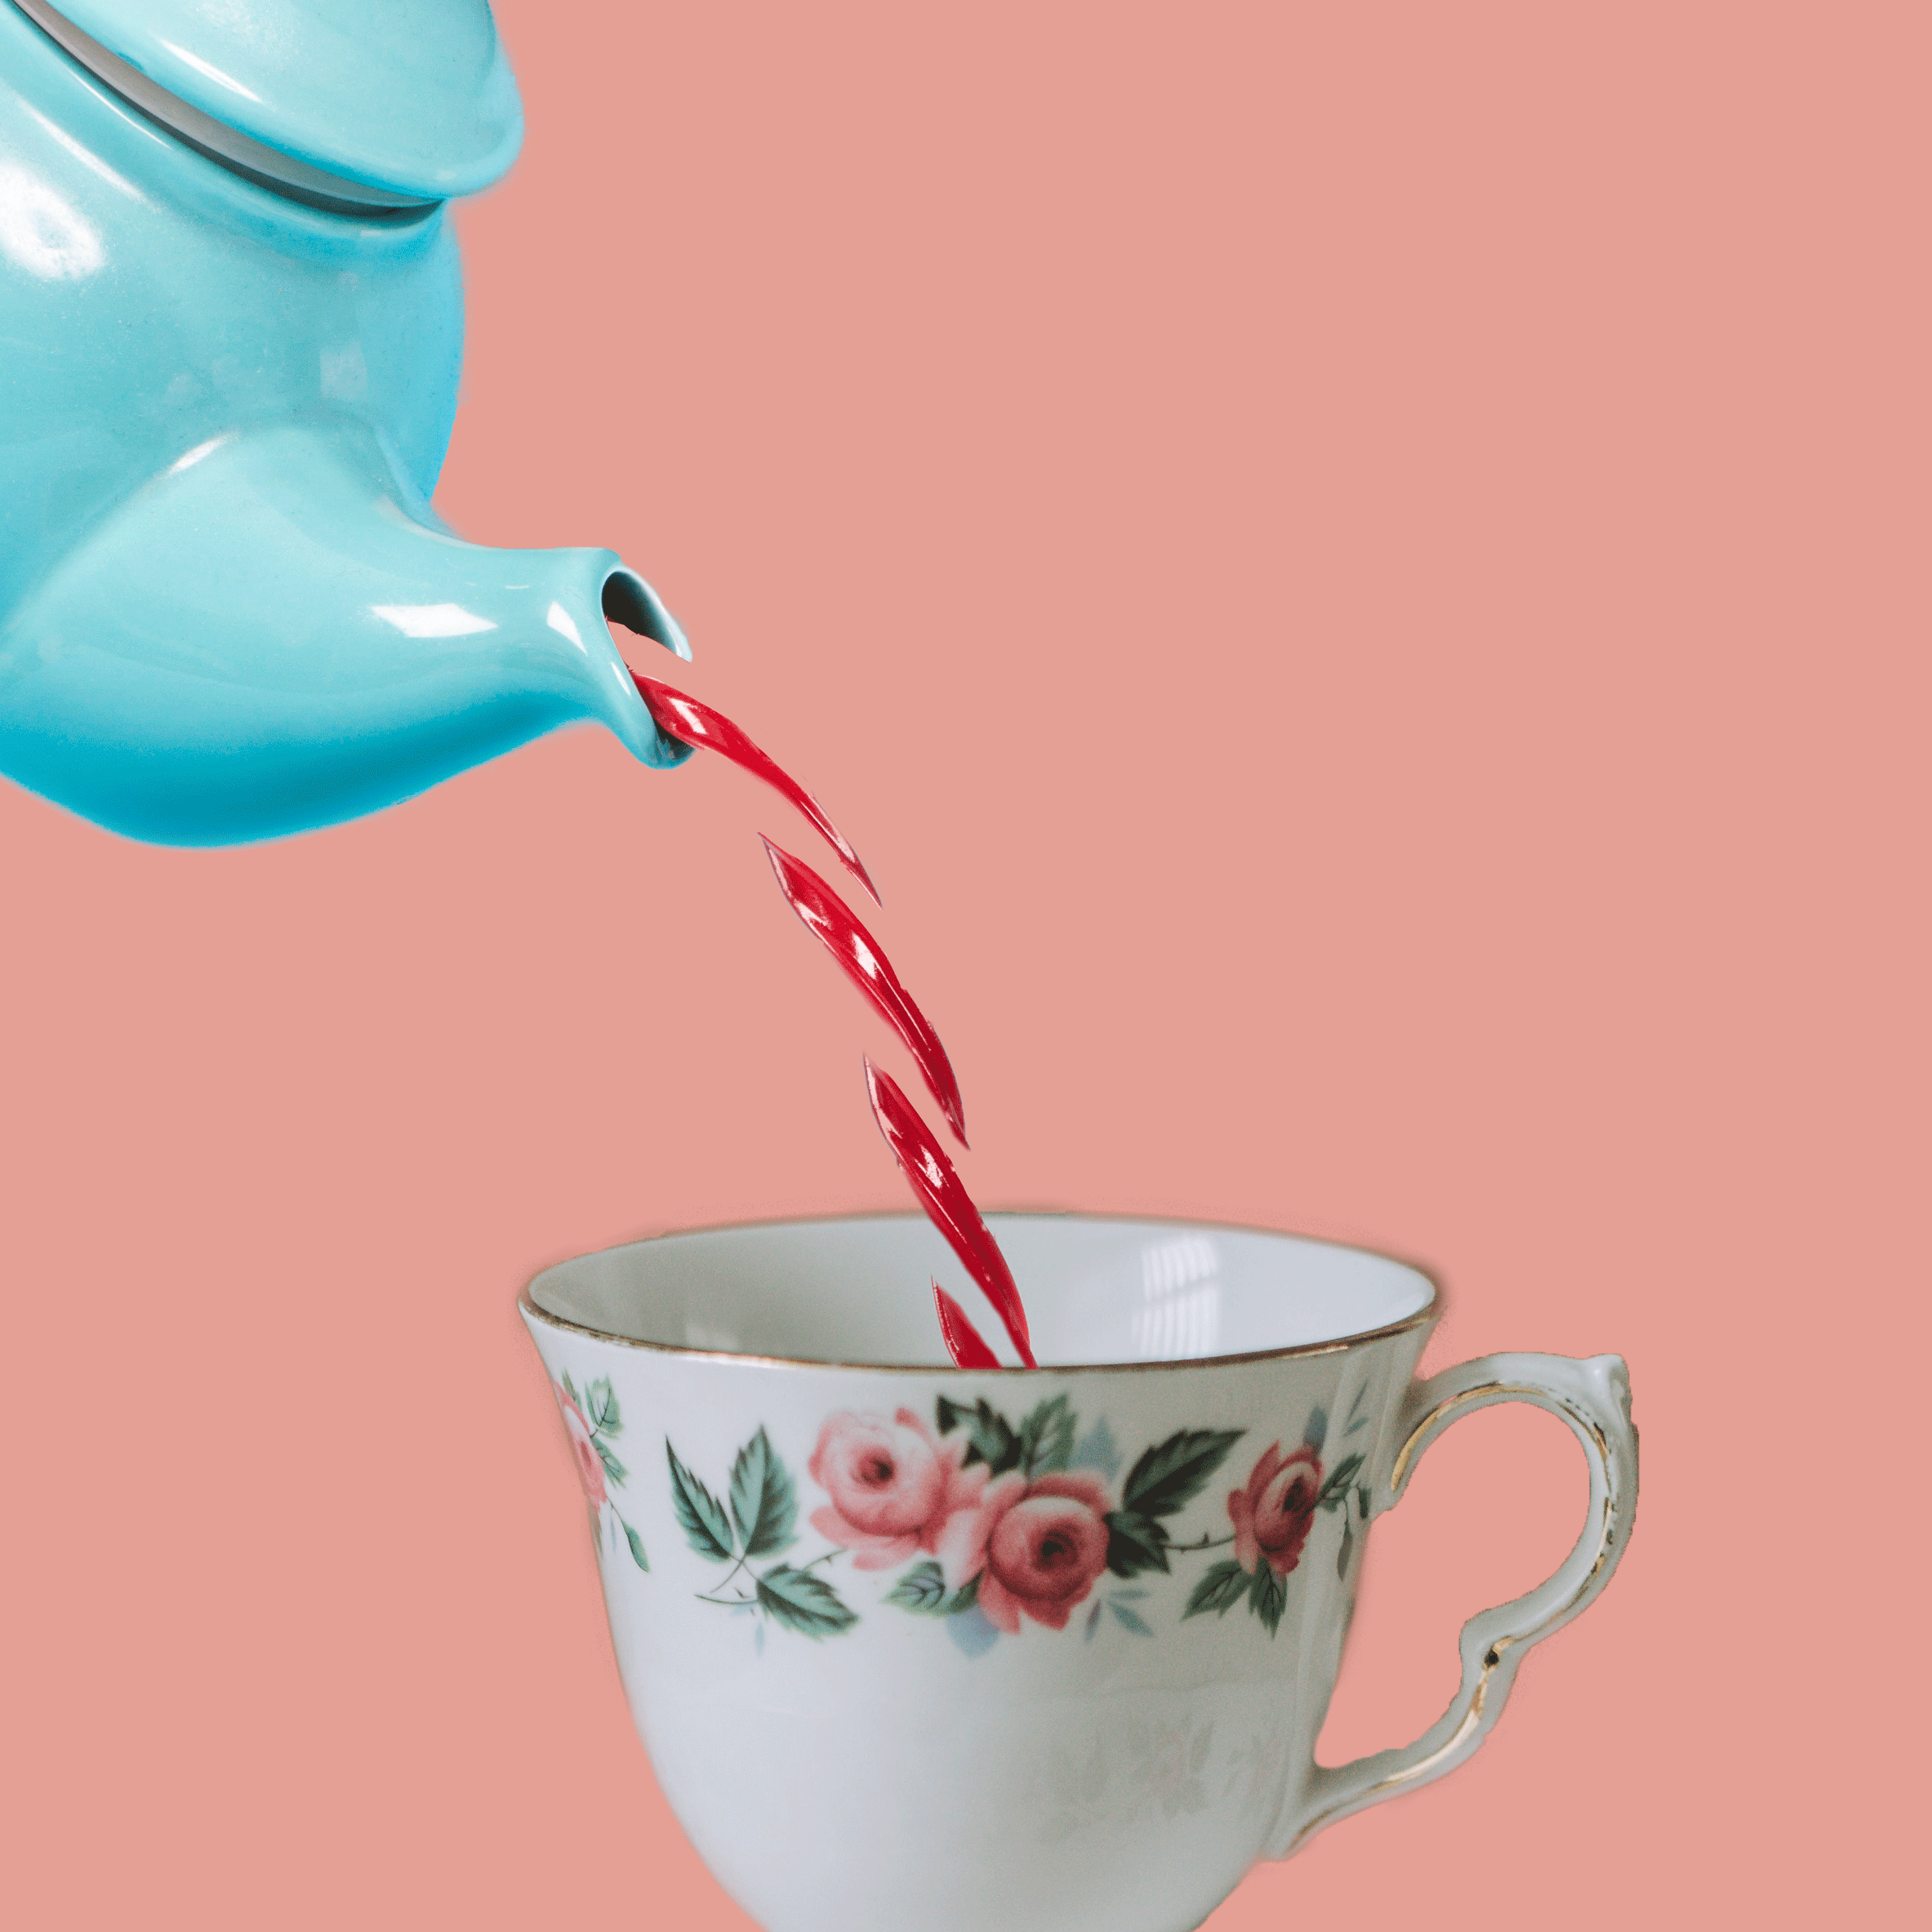 Animated Photo of pouring Tea into a Cup